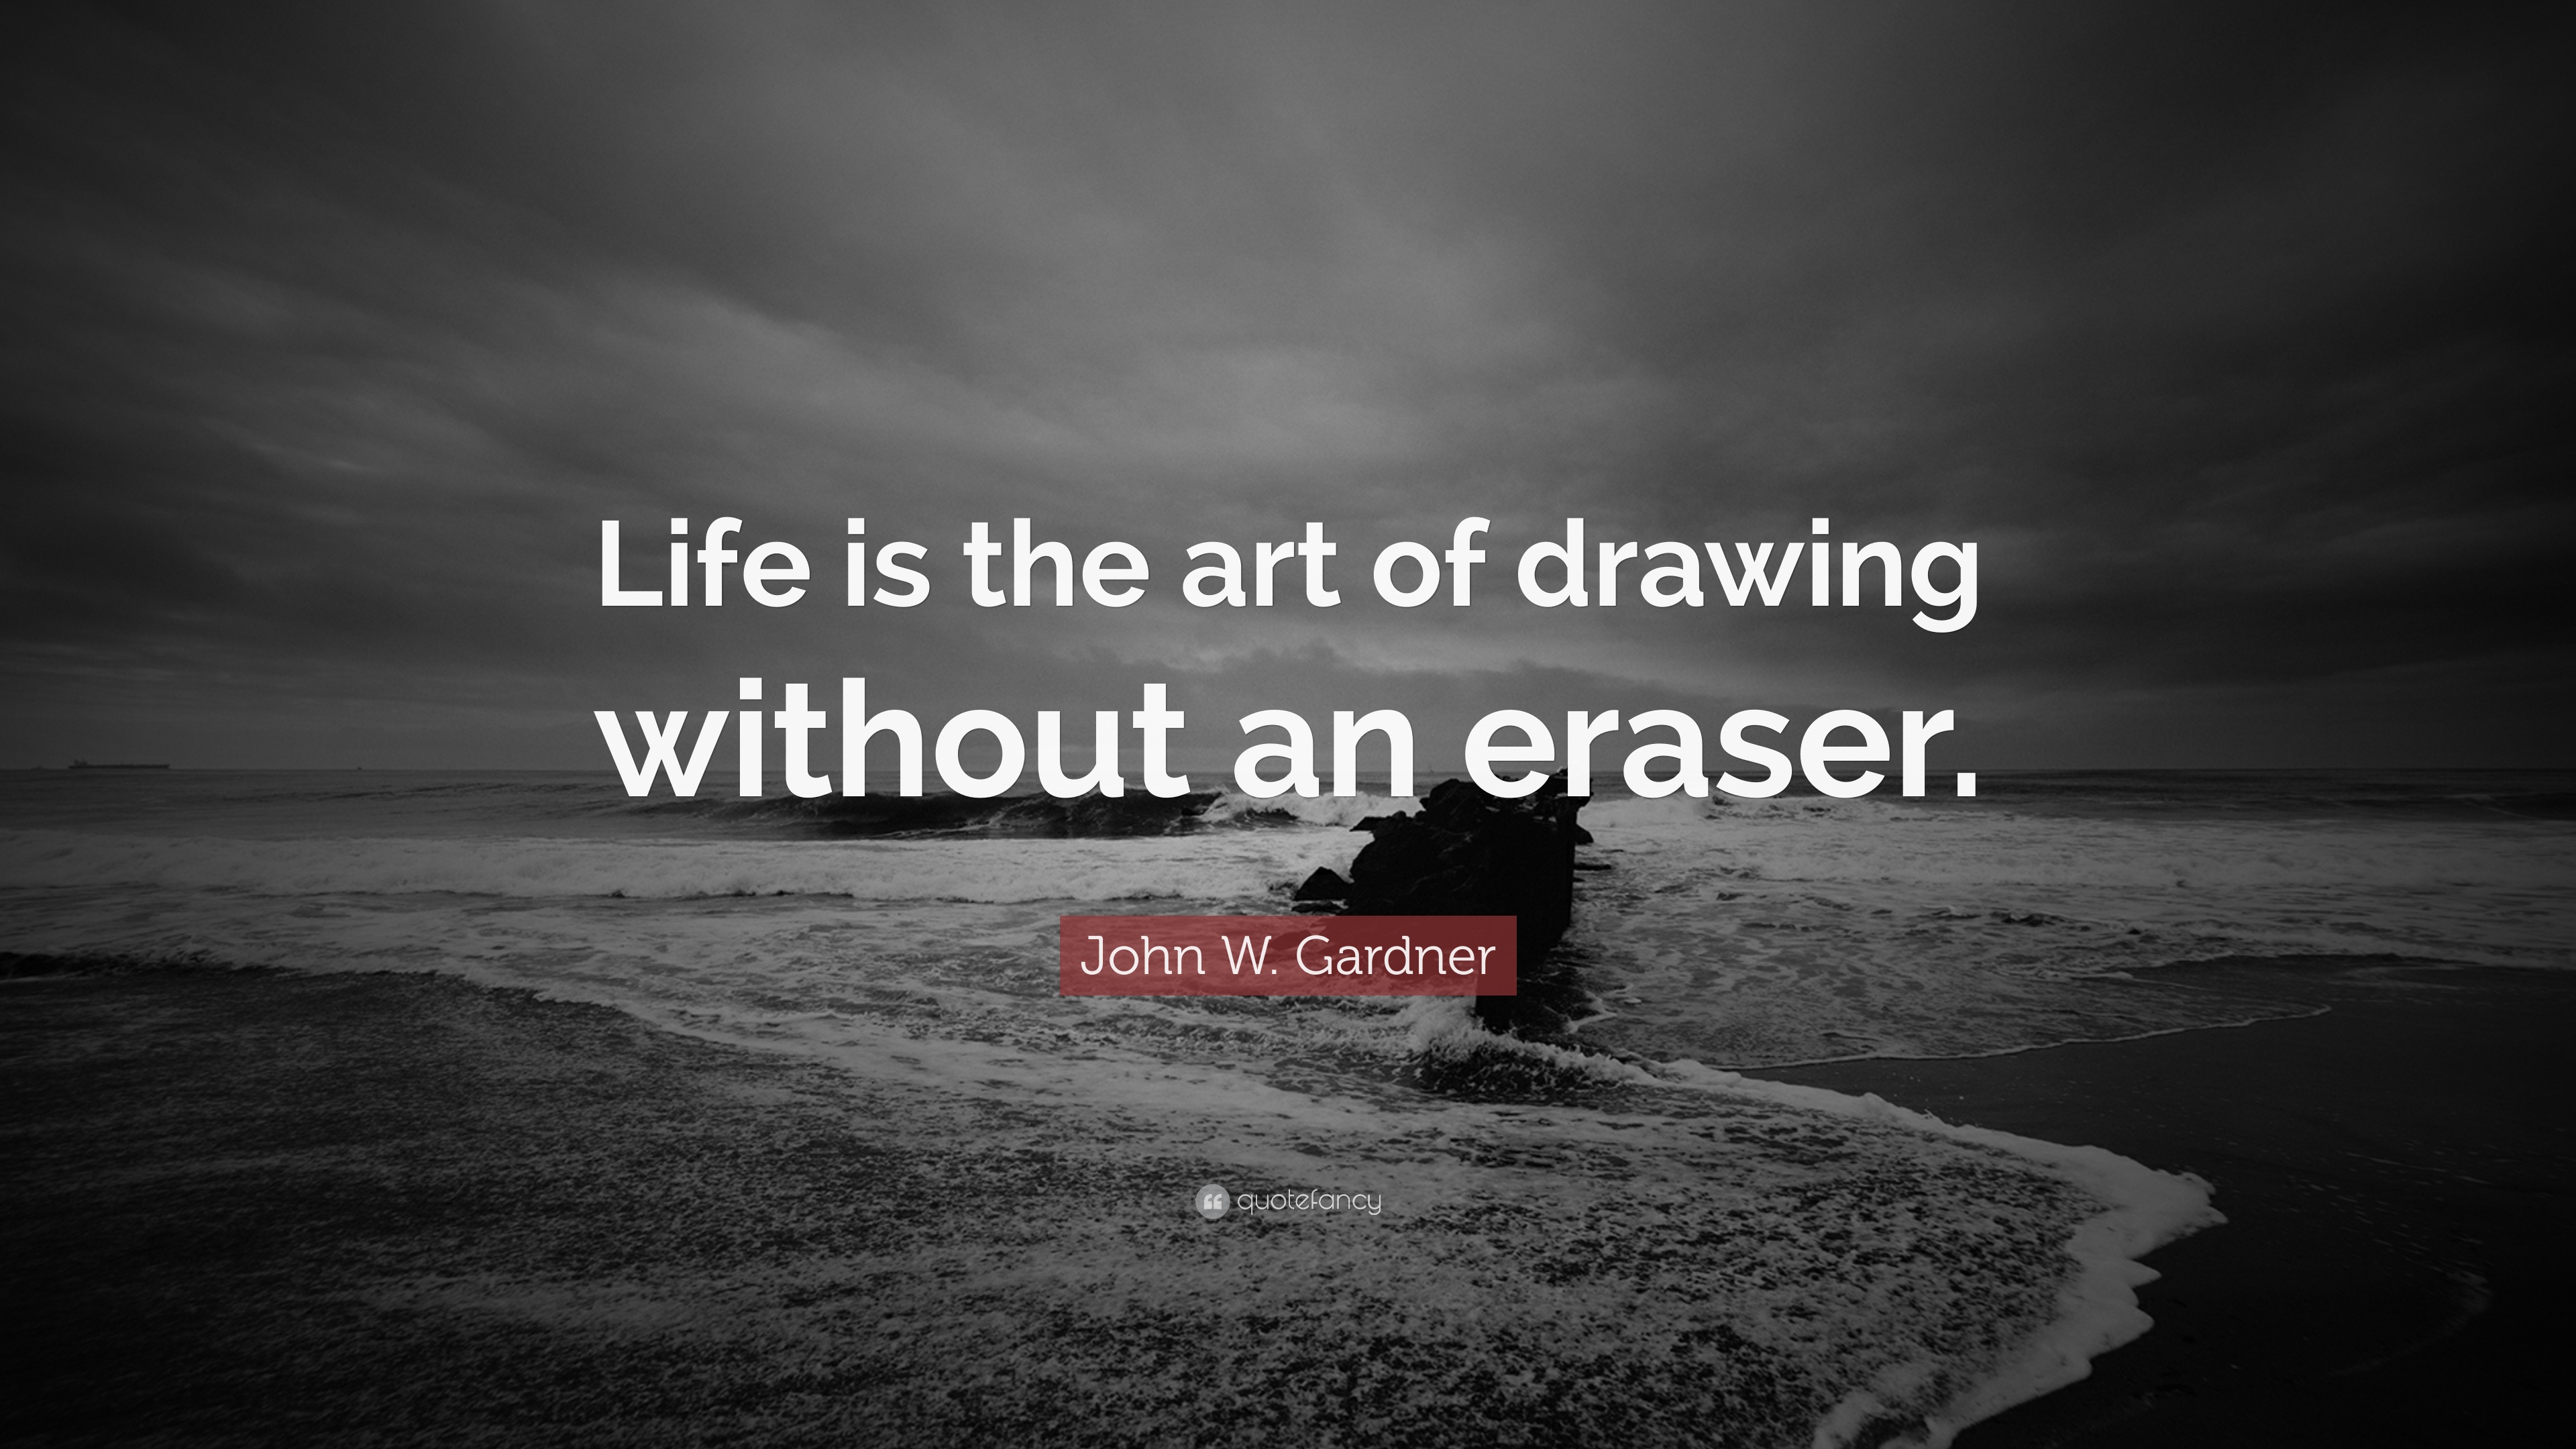 John W. Gardner Quote “Life is the art of drawing without an eraser.”